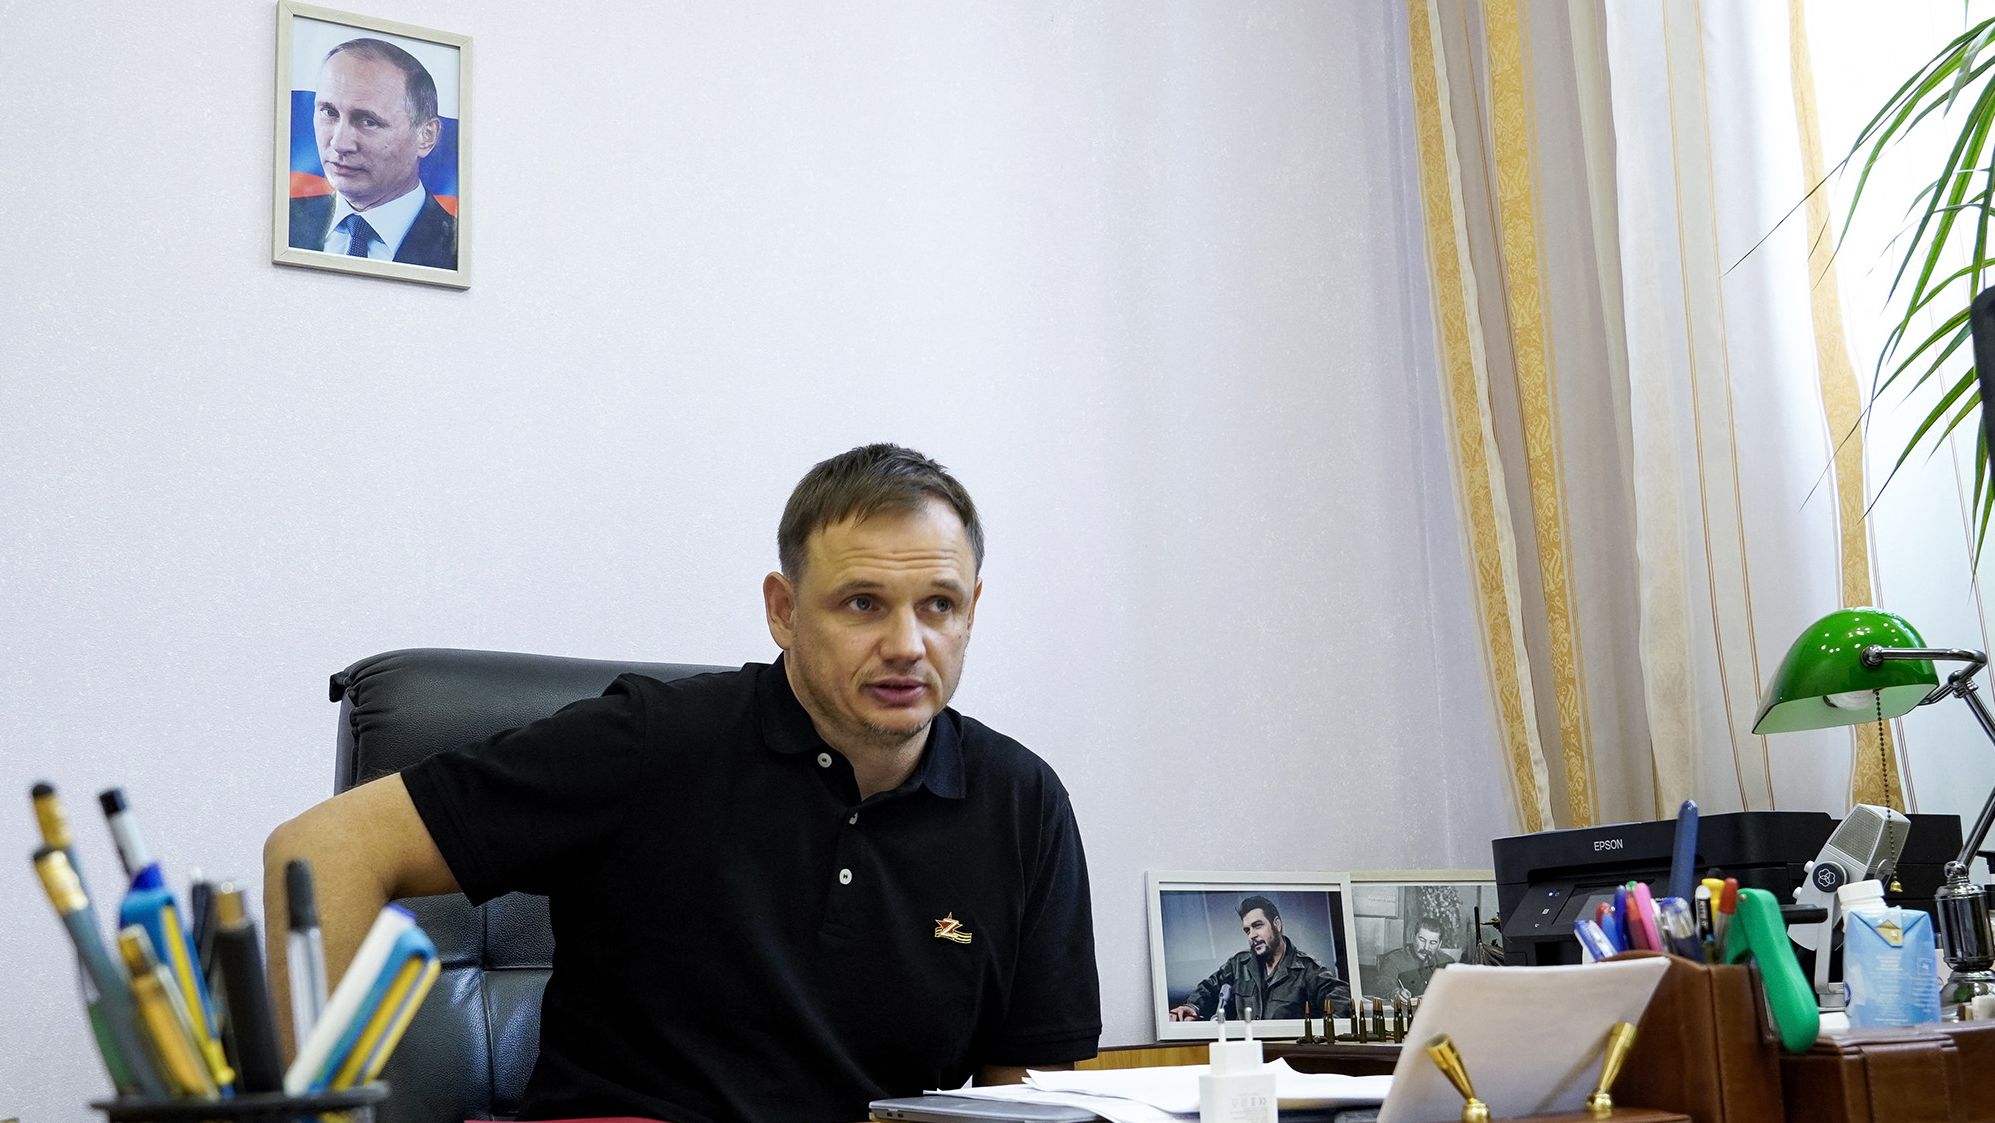 Kirill Stremousov is pictured in his office, with a portrait of Russian President Vladimir Putin seen on the wall behind him, in the city of Kherson on July 20.